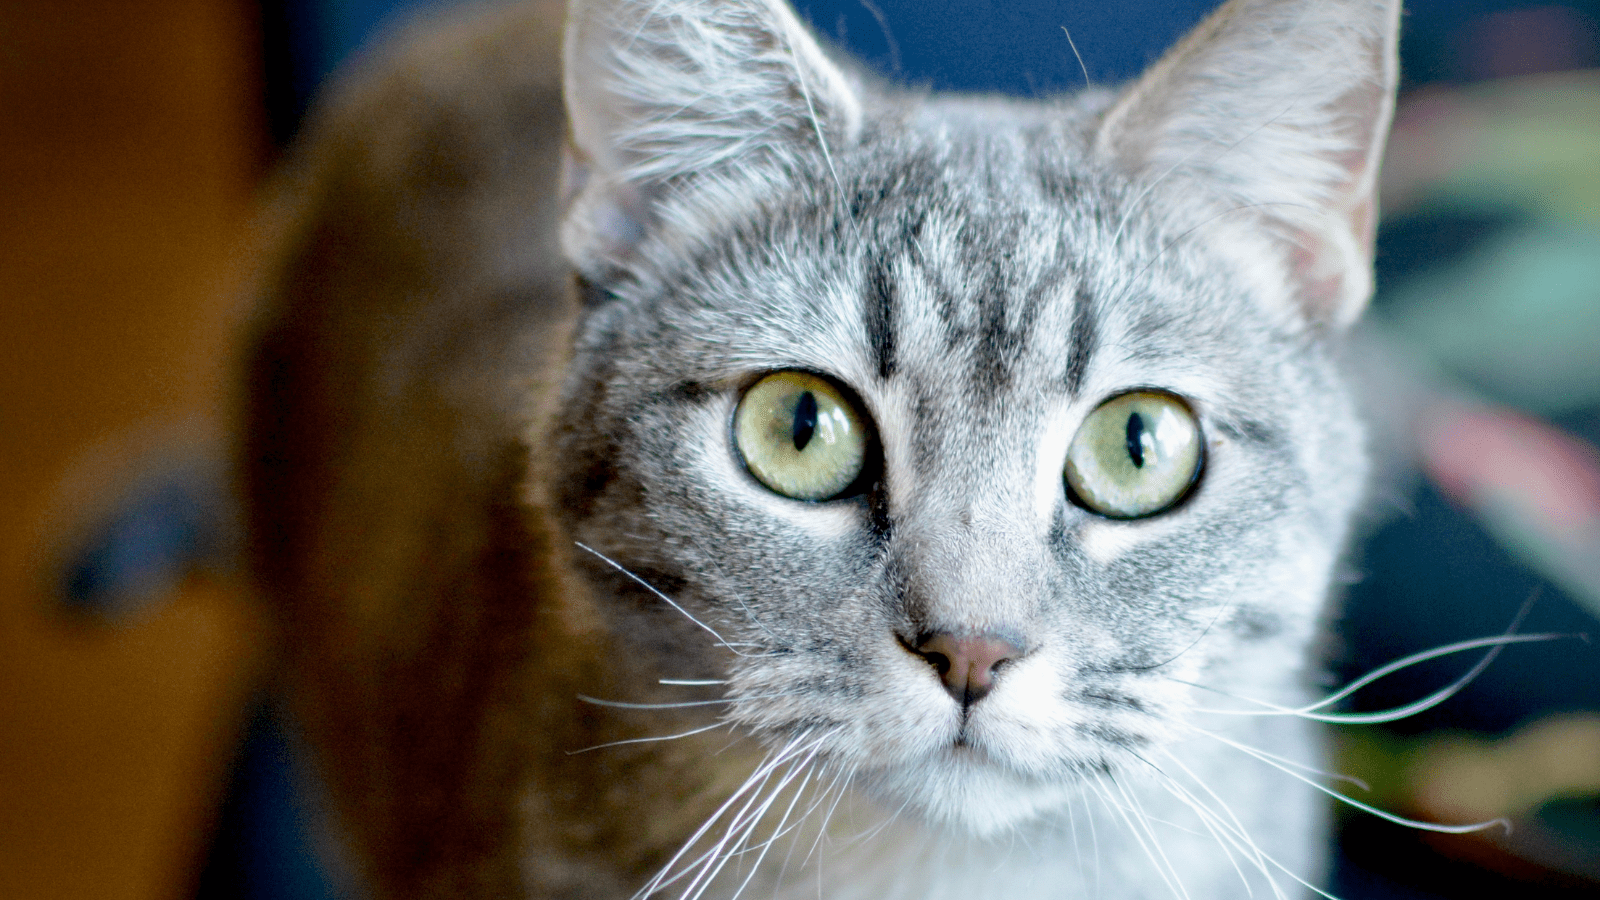 Close up image of Dusk's face; a silver tabby with soft green eyes.